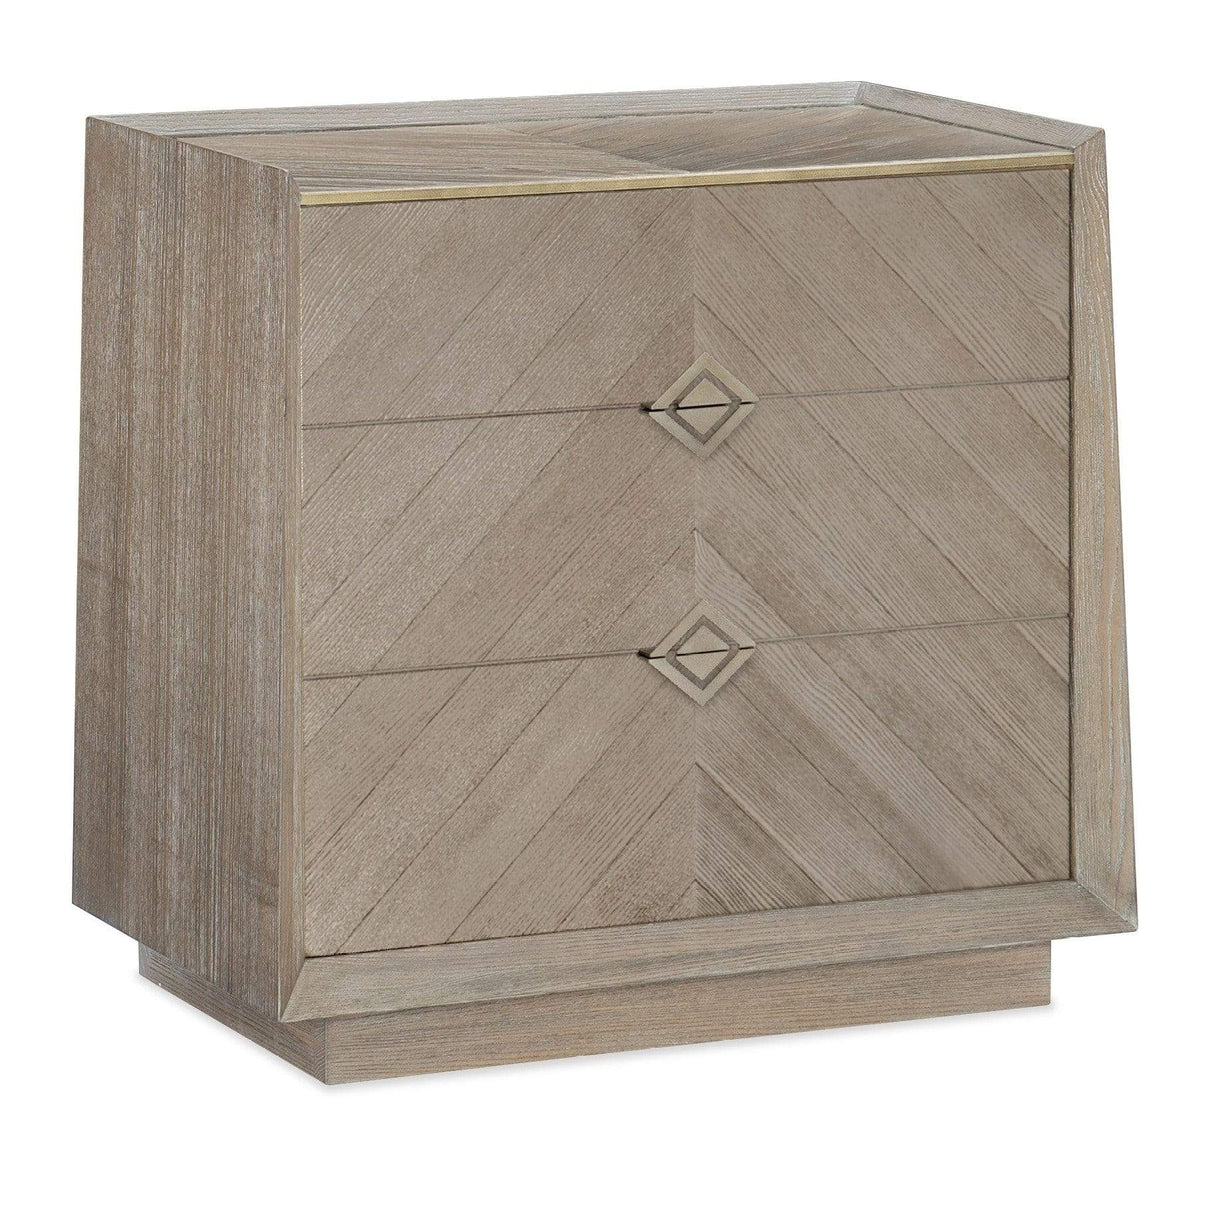 Caracole Crossed Purposes Nightstand Furniture caracole-CLA-019-065